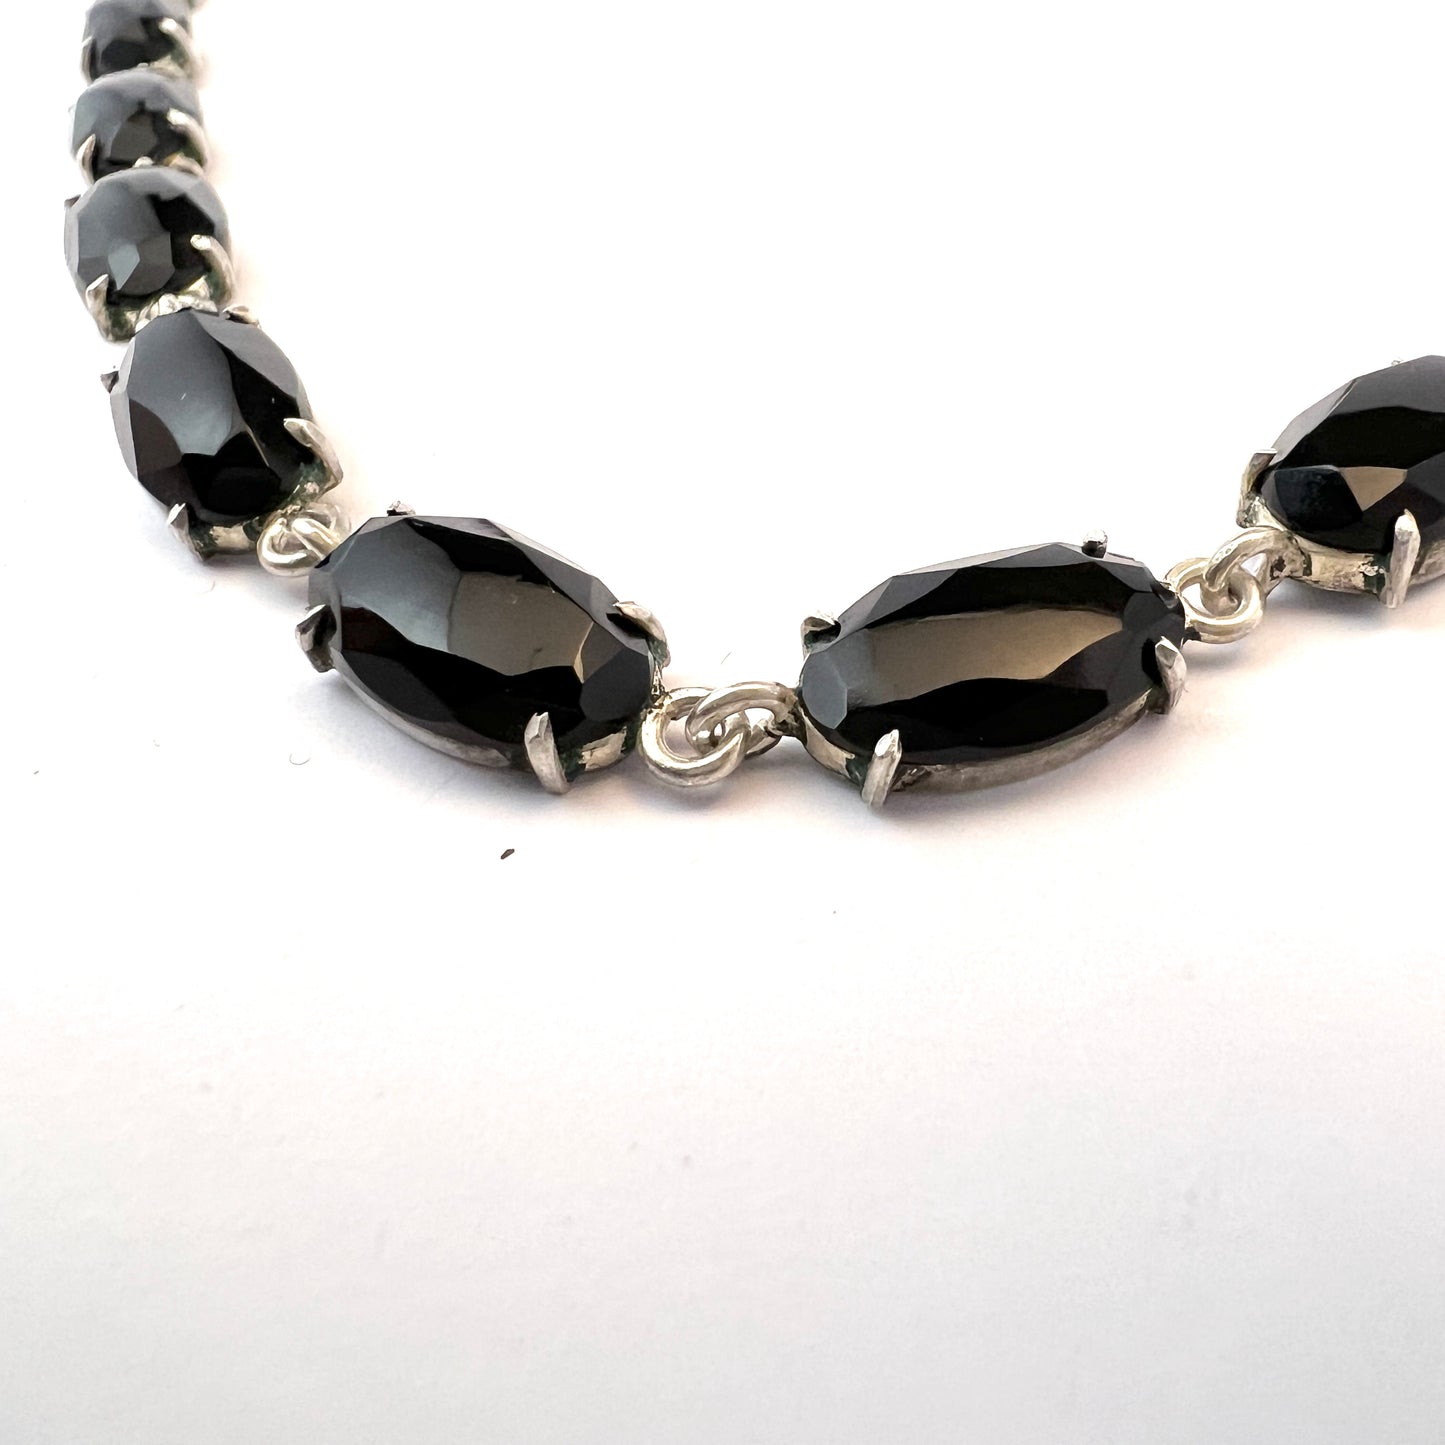 Antique 1910s. Solid Silver French Jet Rivière Mourning Necklace.